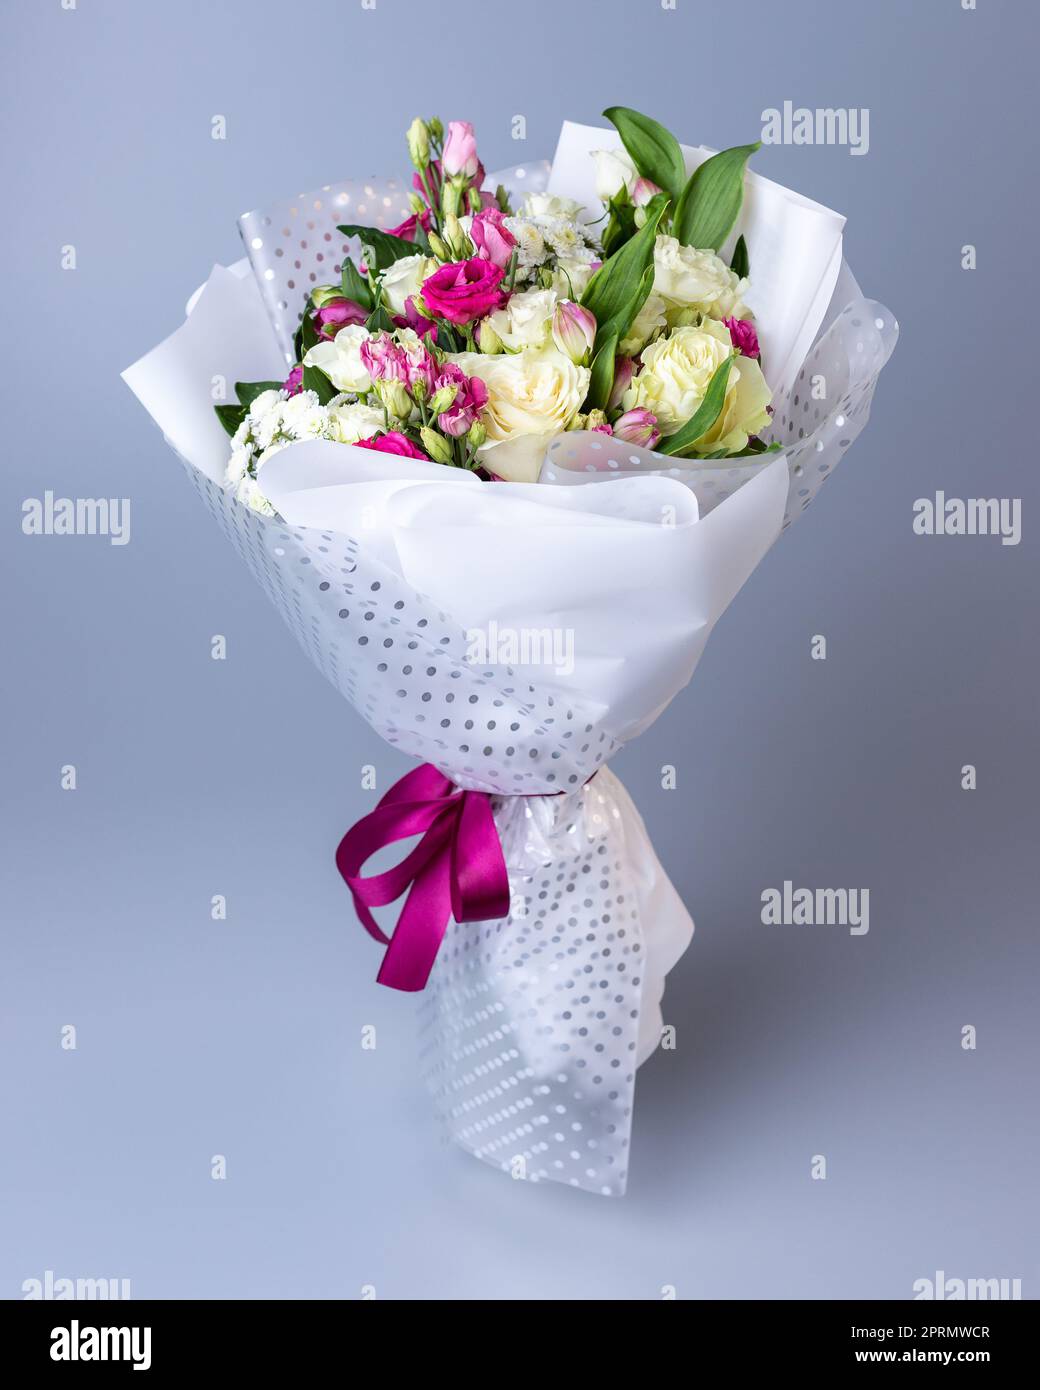 Bouquet of roses, eustoma and irises on a blue background. Stock Photo